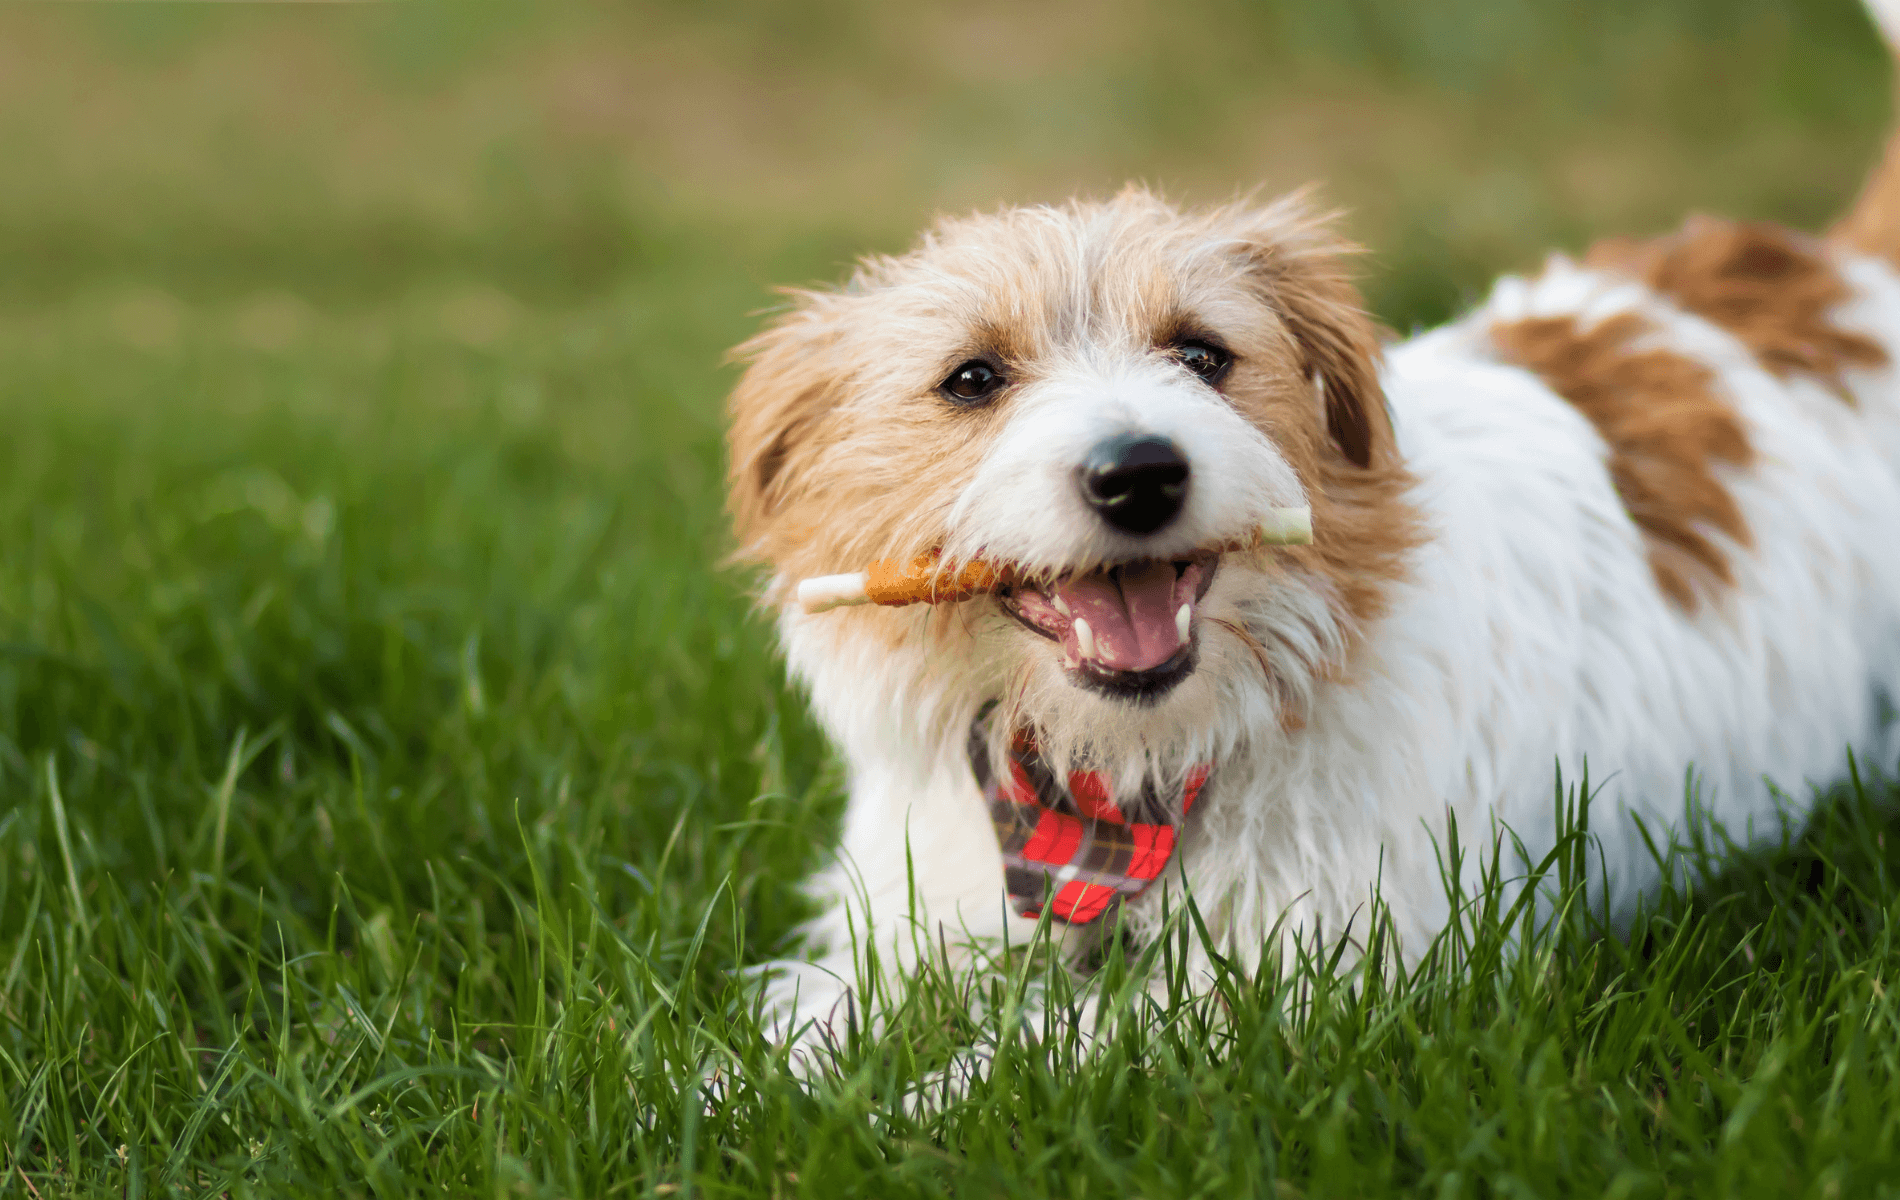 A dog lying in grass with a denta stick in its mouth